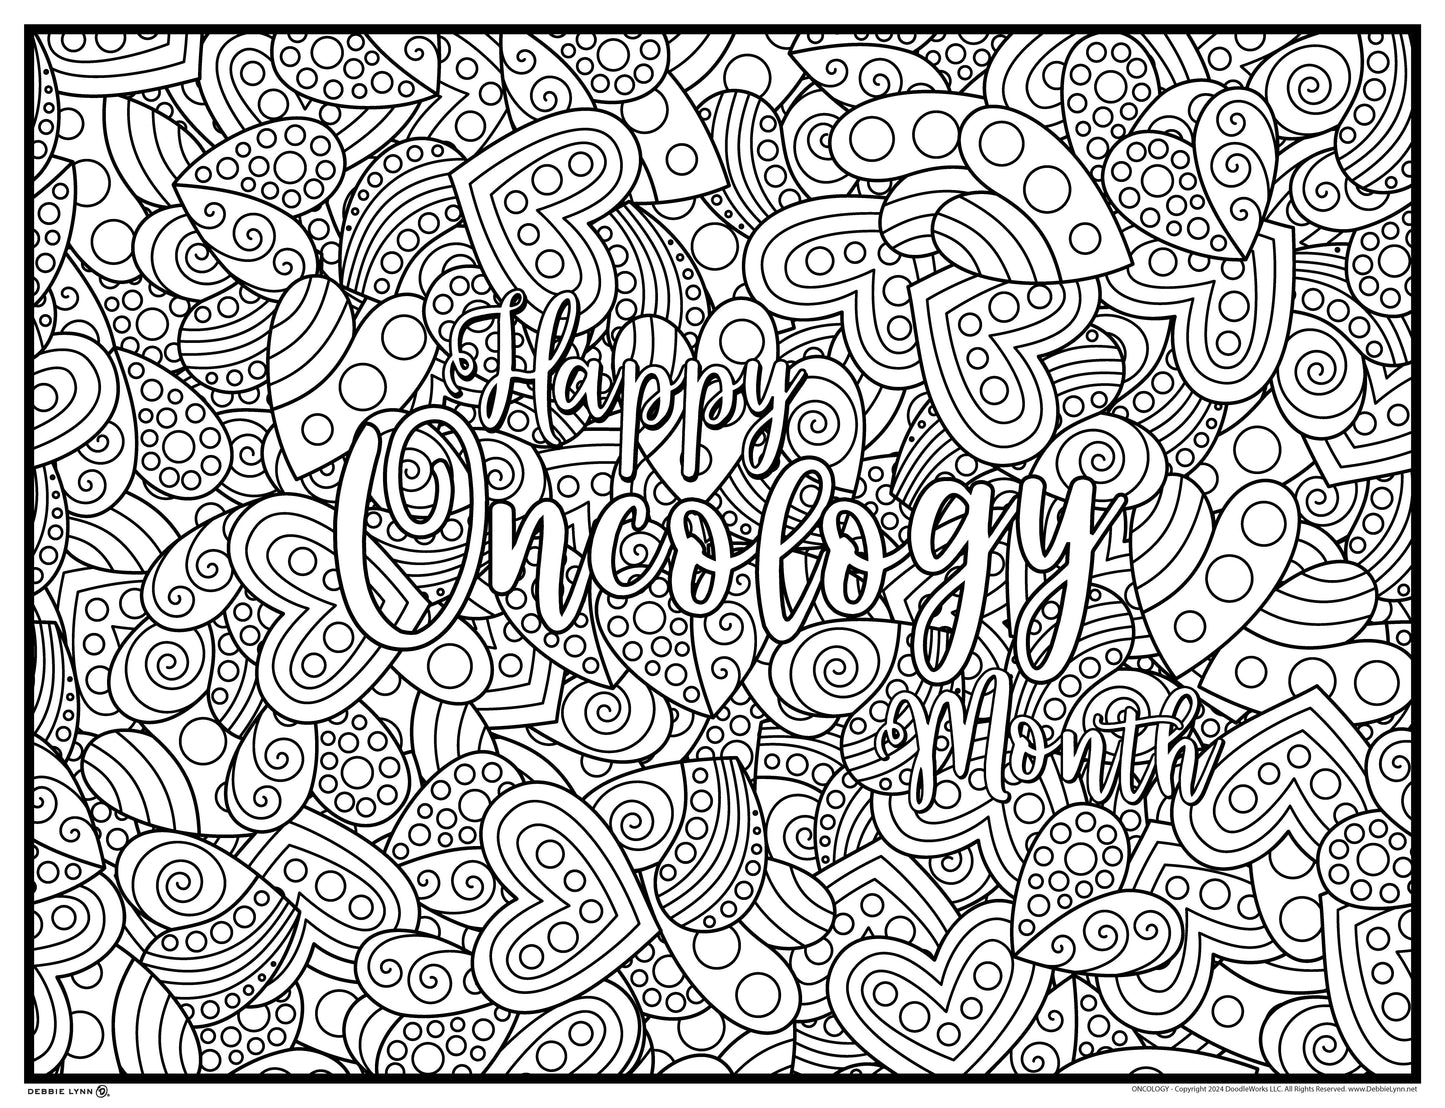 Oncology Month Giant Coloring Poster 46" x 60"